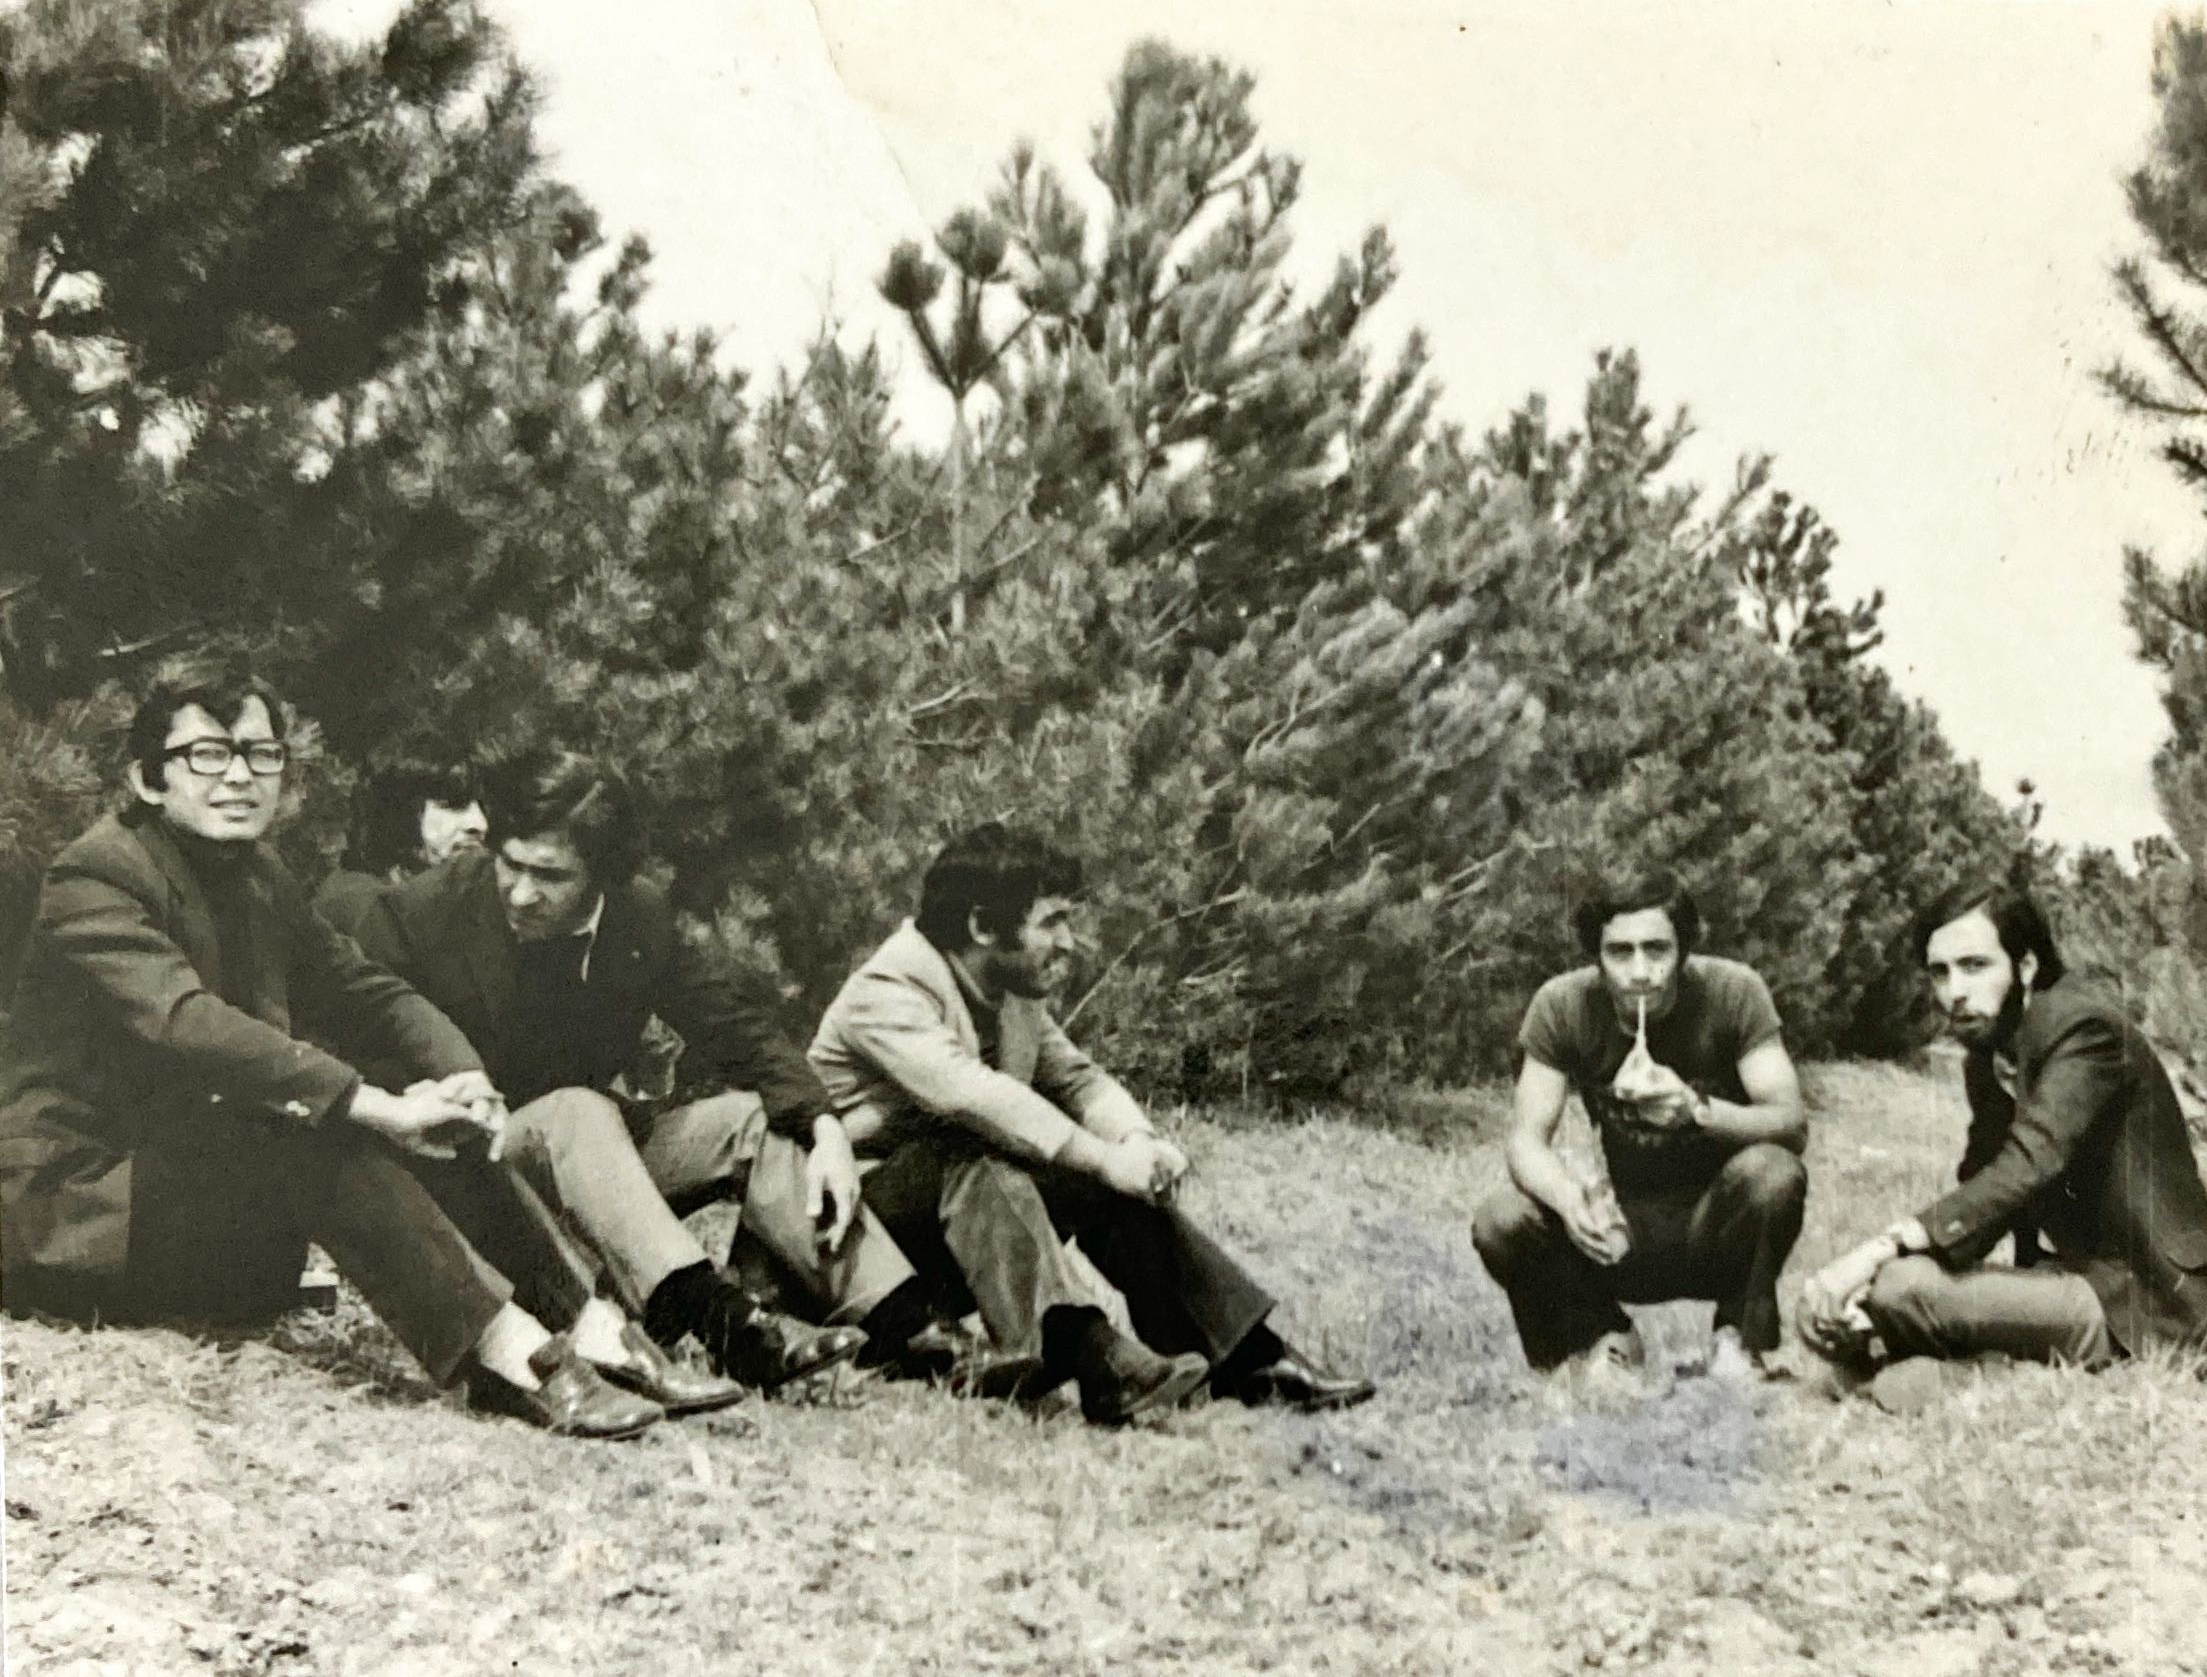 Students sitting on the grass, spring 1973